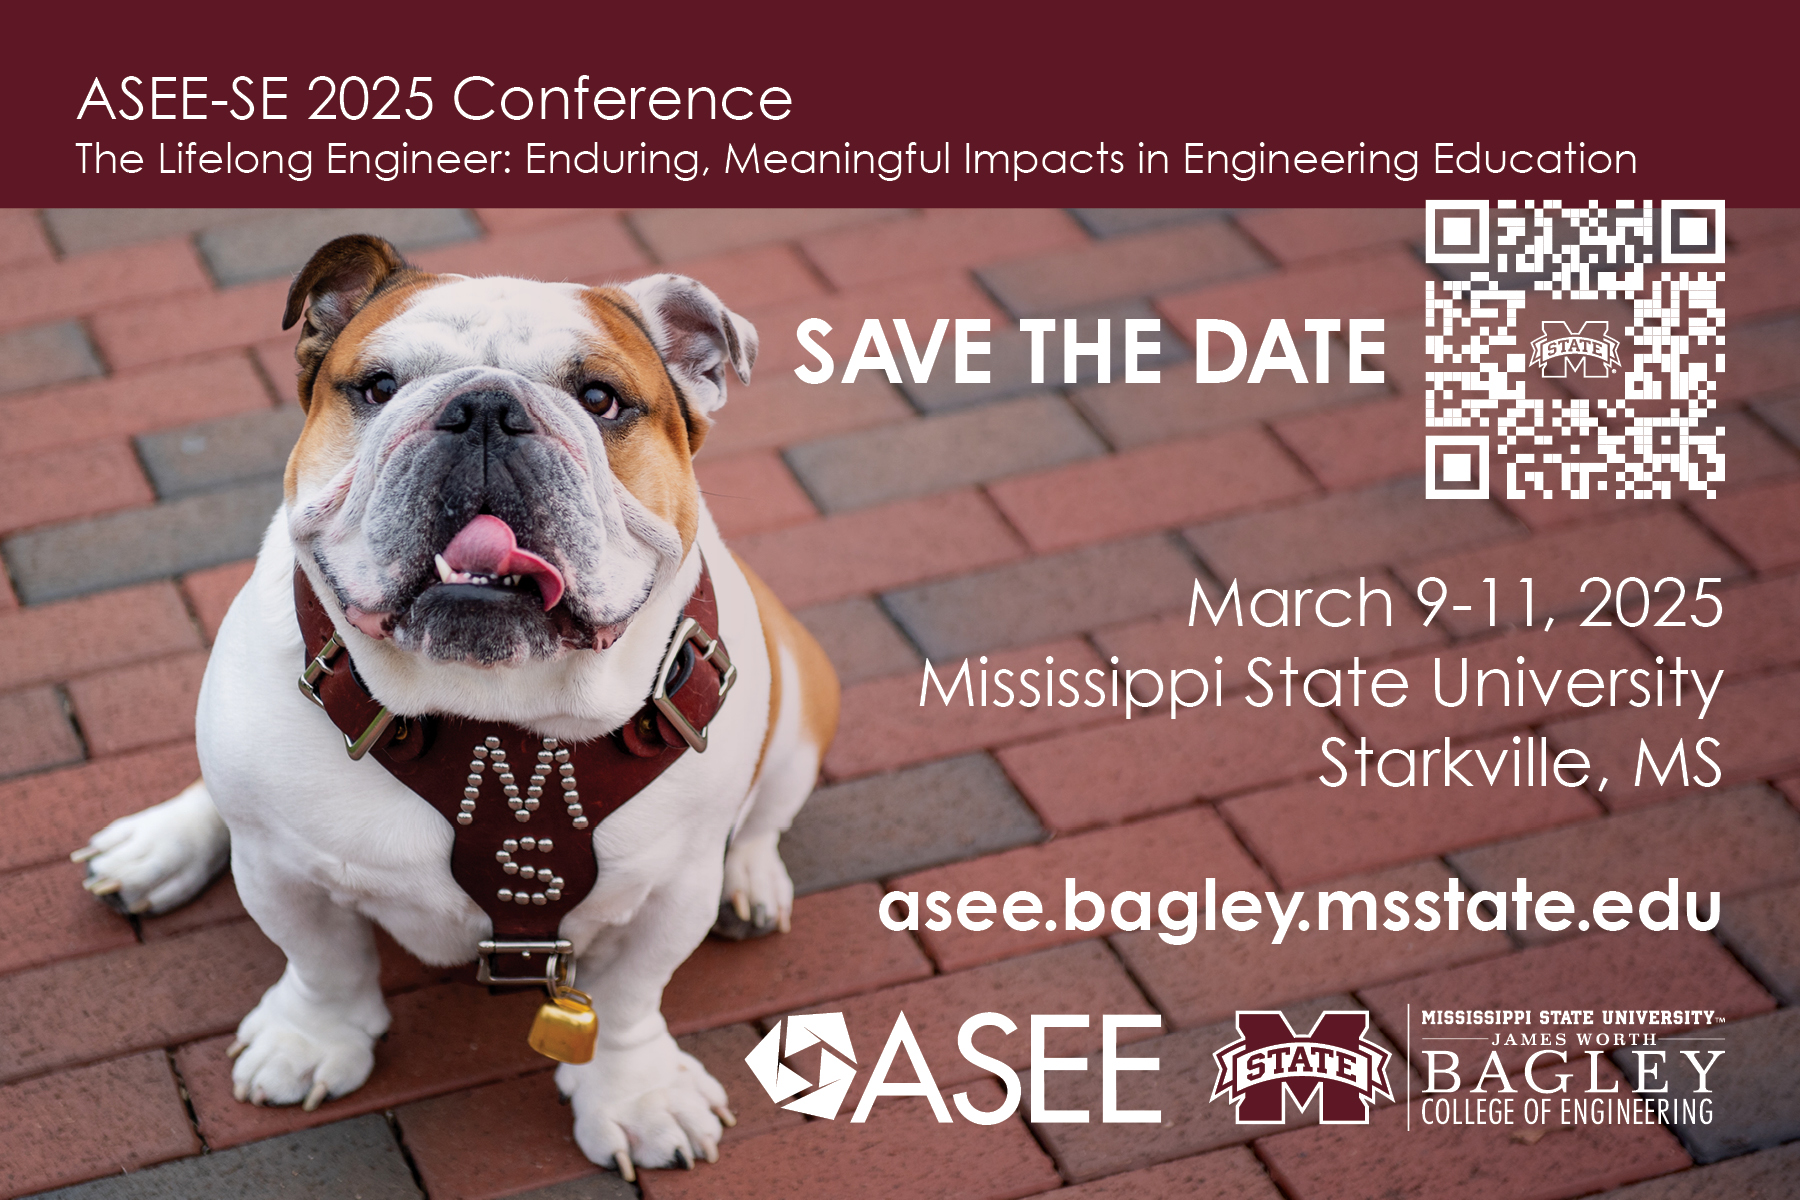 ASEE-SE 2025 Save The Date